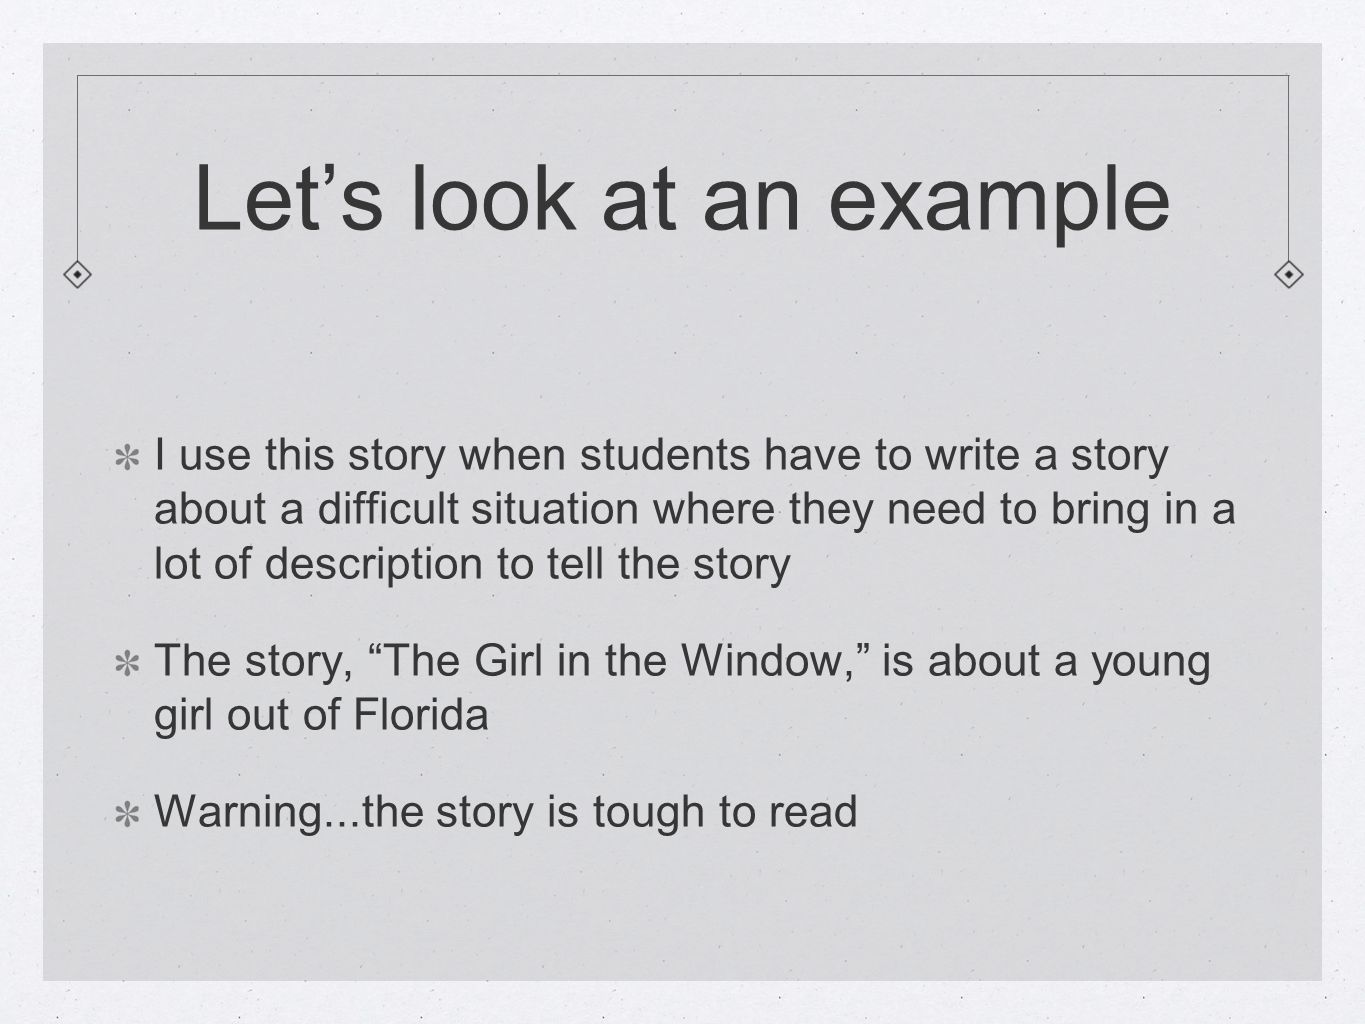 Let’s look at an example I use this story when students have to write a story about a difficult situation where they need to bring in a lot of description to tell the story The story, The Girl in the Window, is about a young girl out of Florida Warning...the story is tough to read